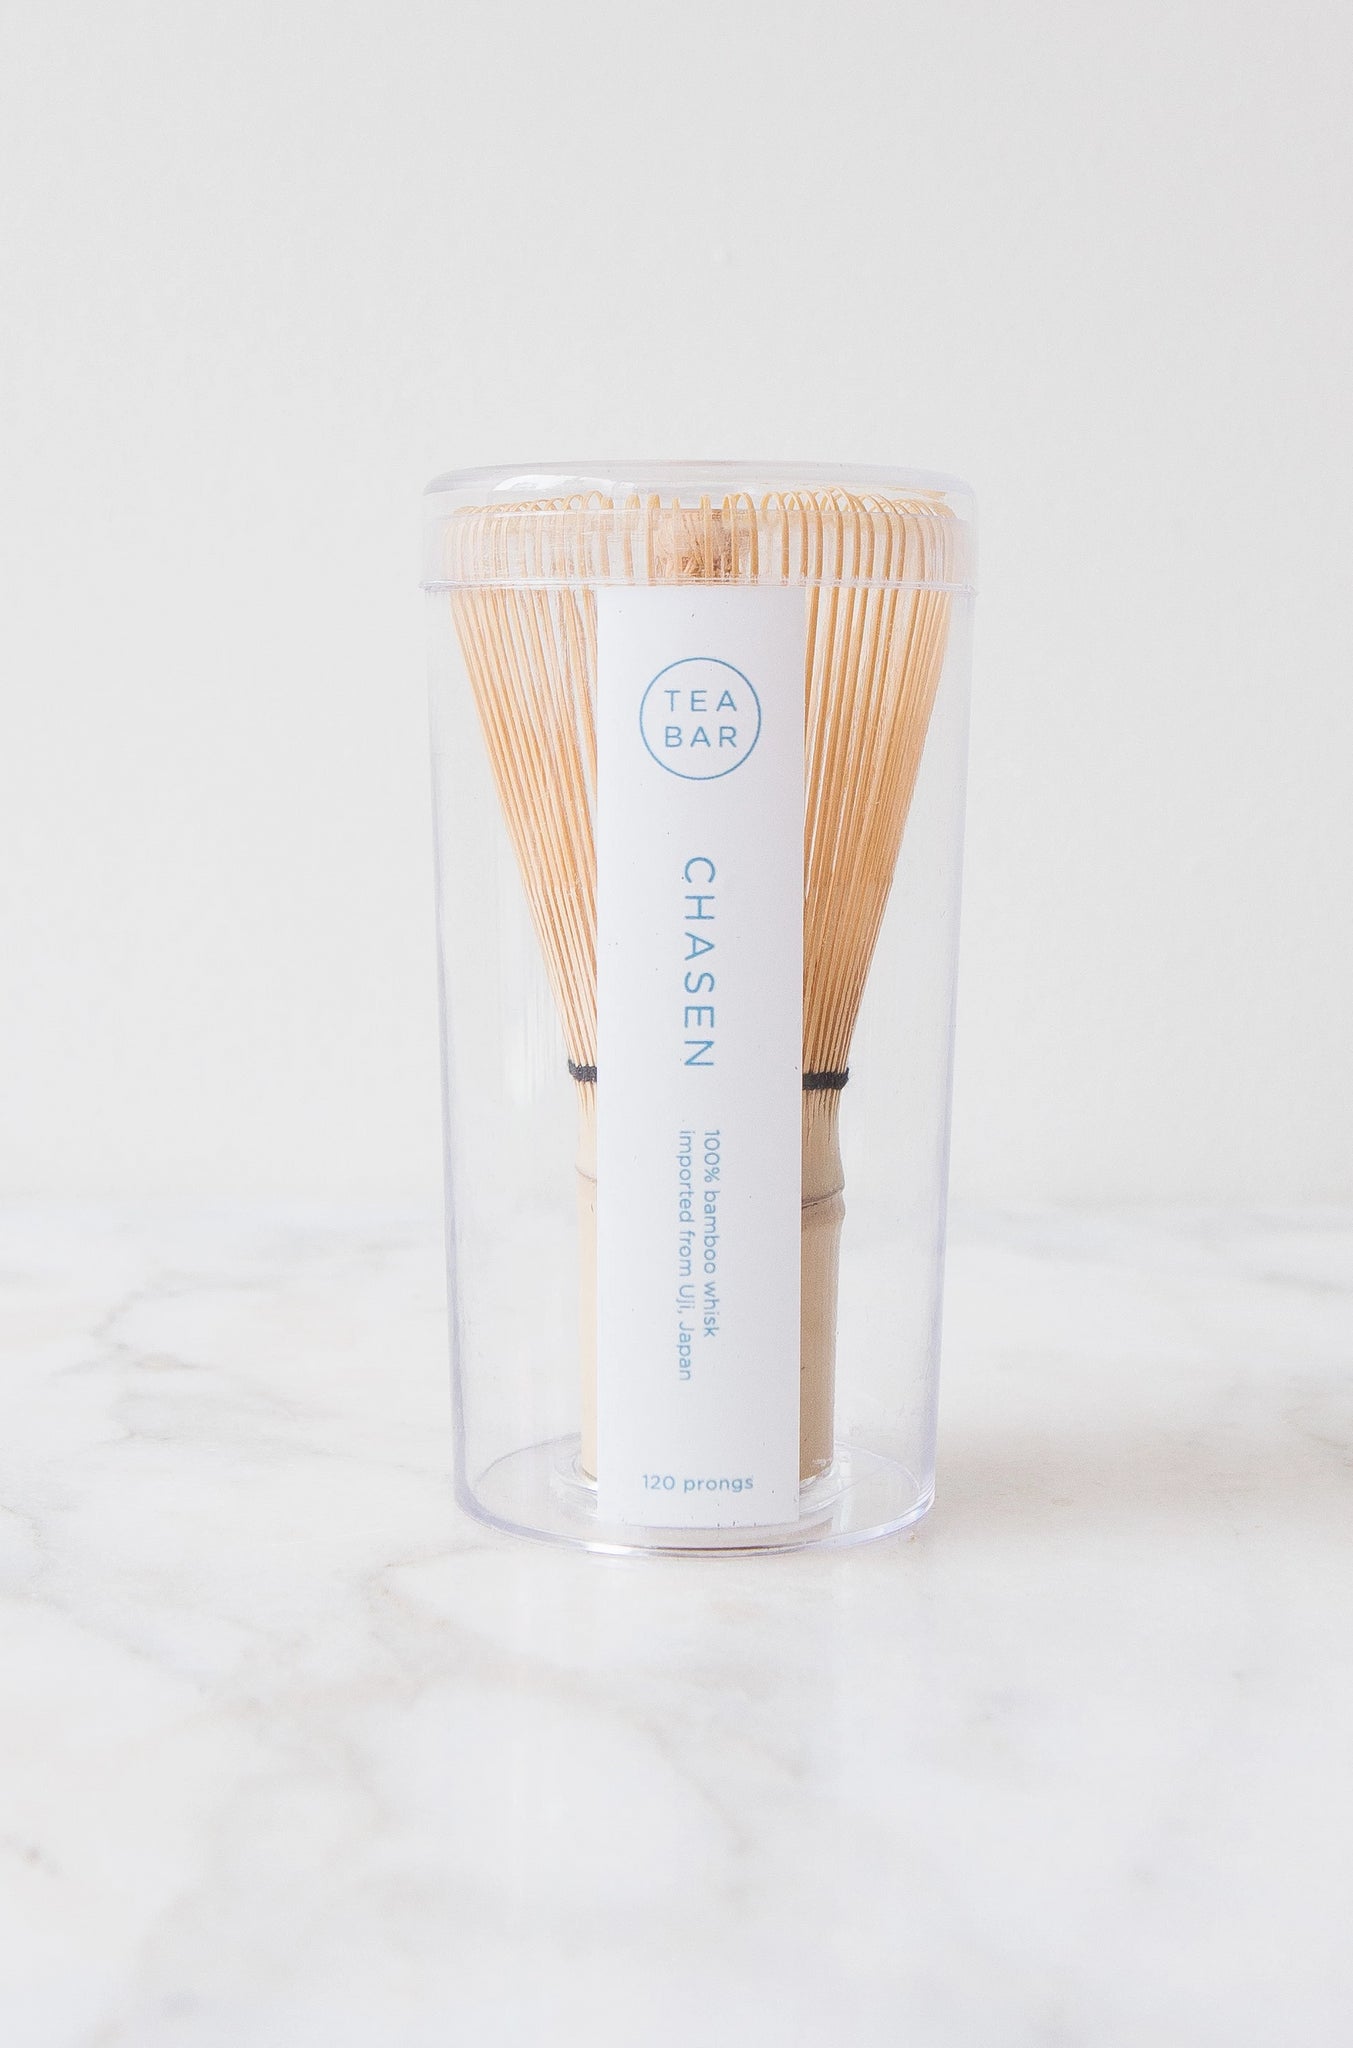 Bamboo Matcha Whisk - Chasen - The Steeping Room